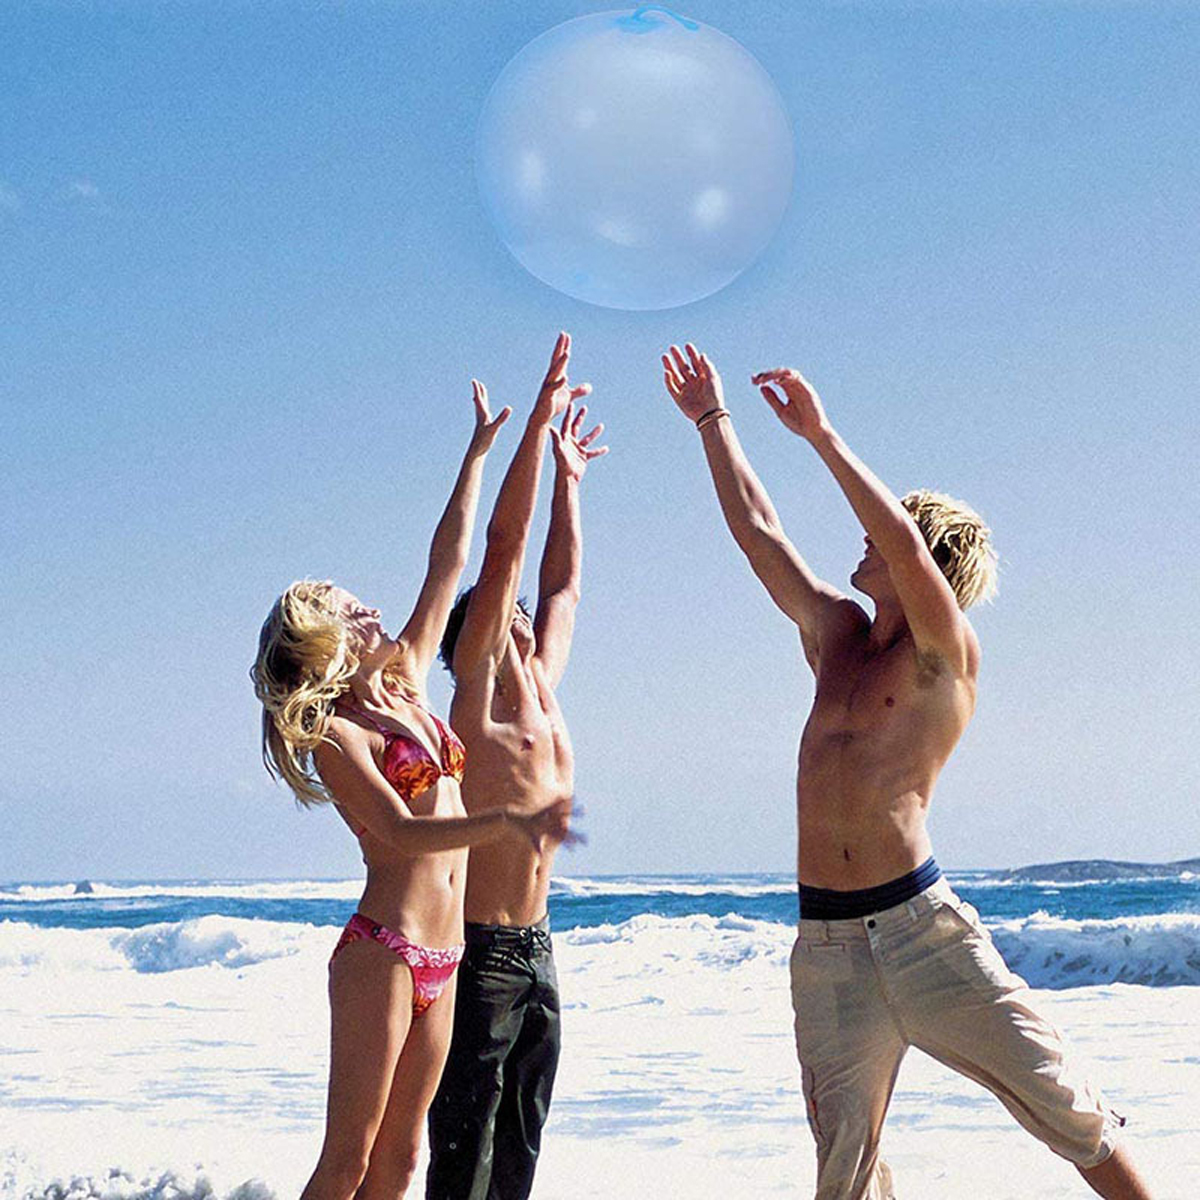 30CM Baby Outdoor Amazing Balls Soft Air Water Filled Ball Blow Up For Children Toy Fun Party Game Summer Gift for Kids